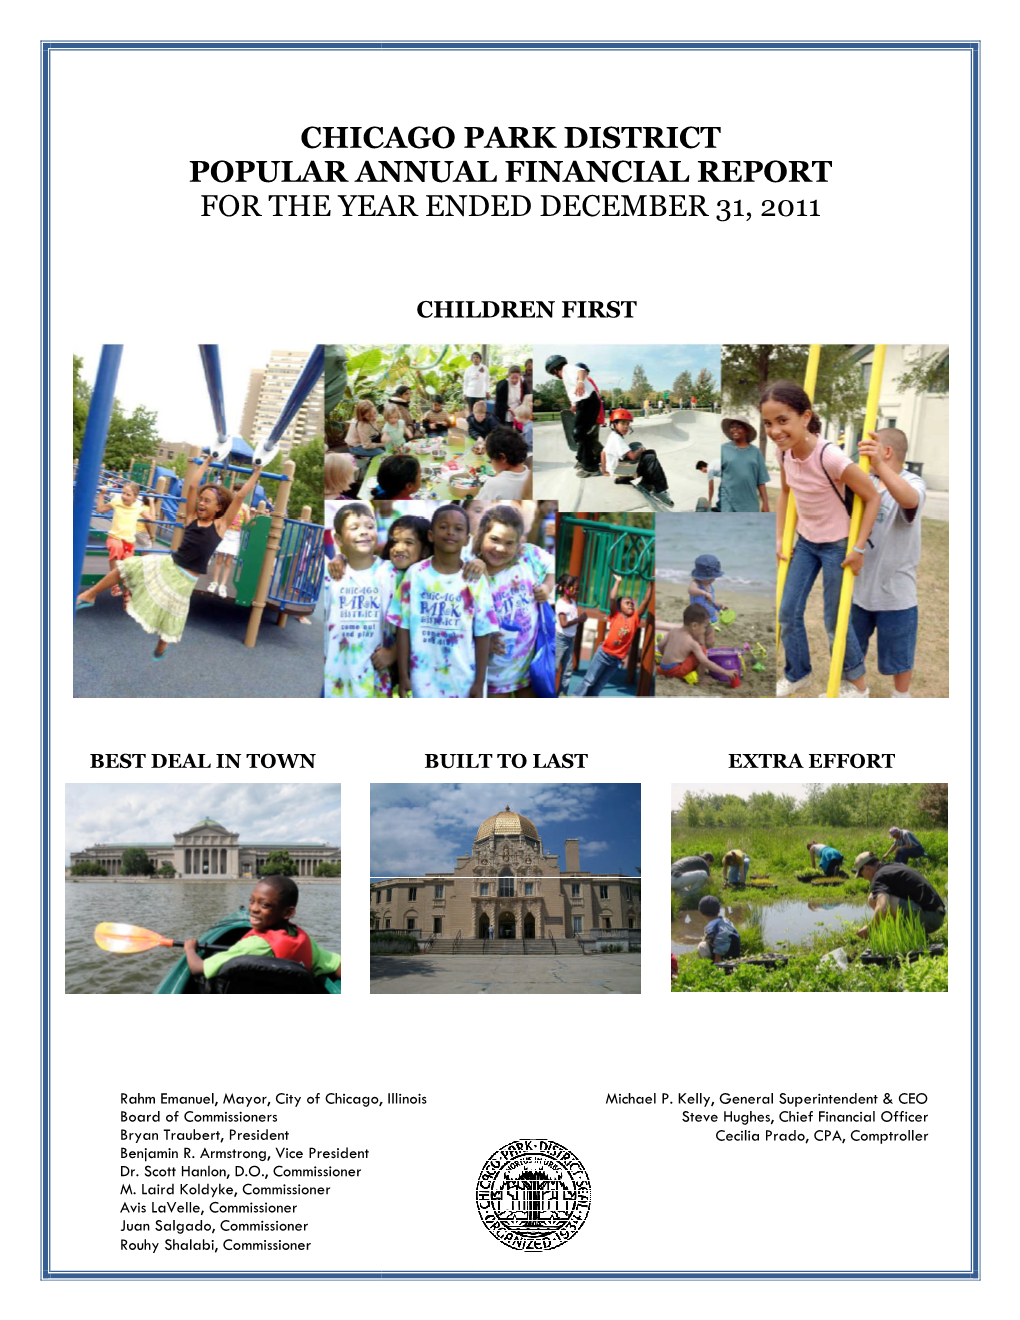 Chicago Park District Pular Annual Financial Report